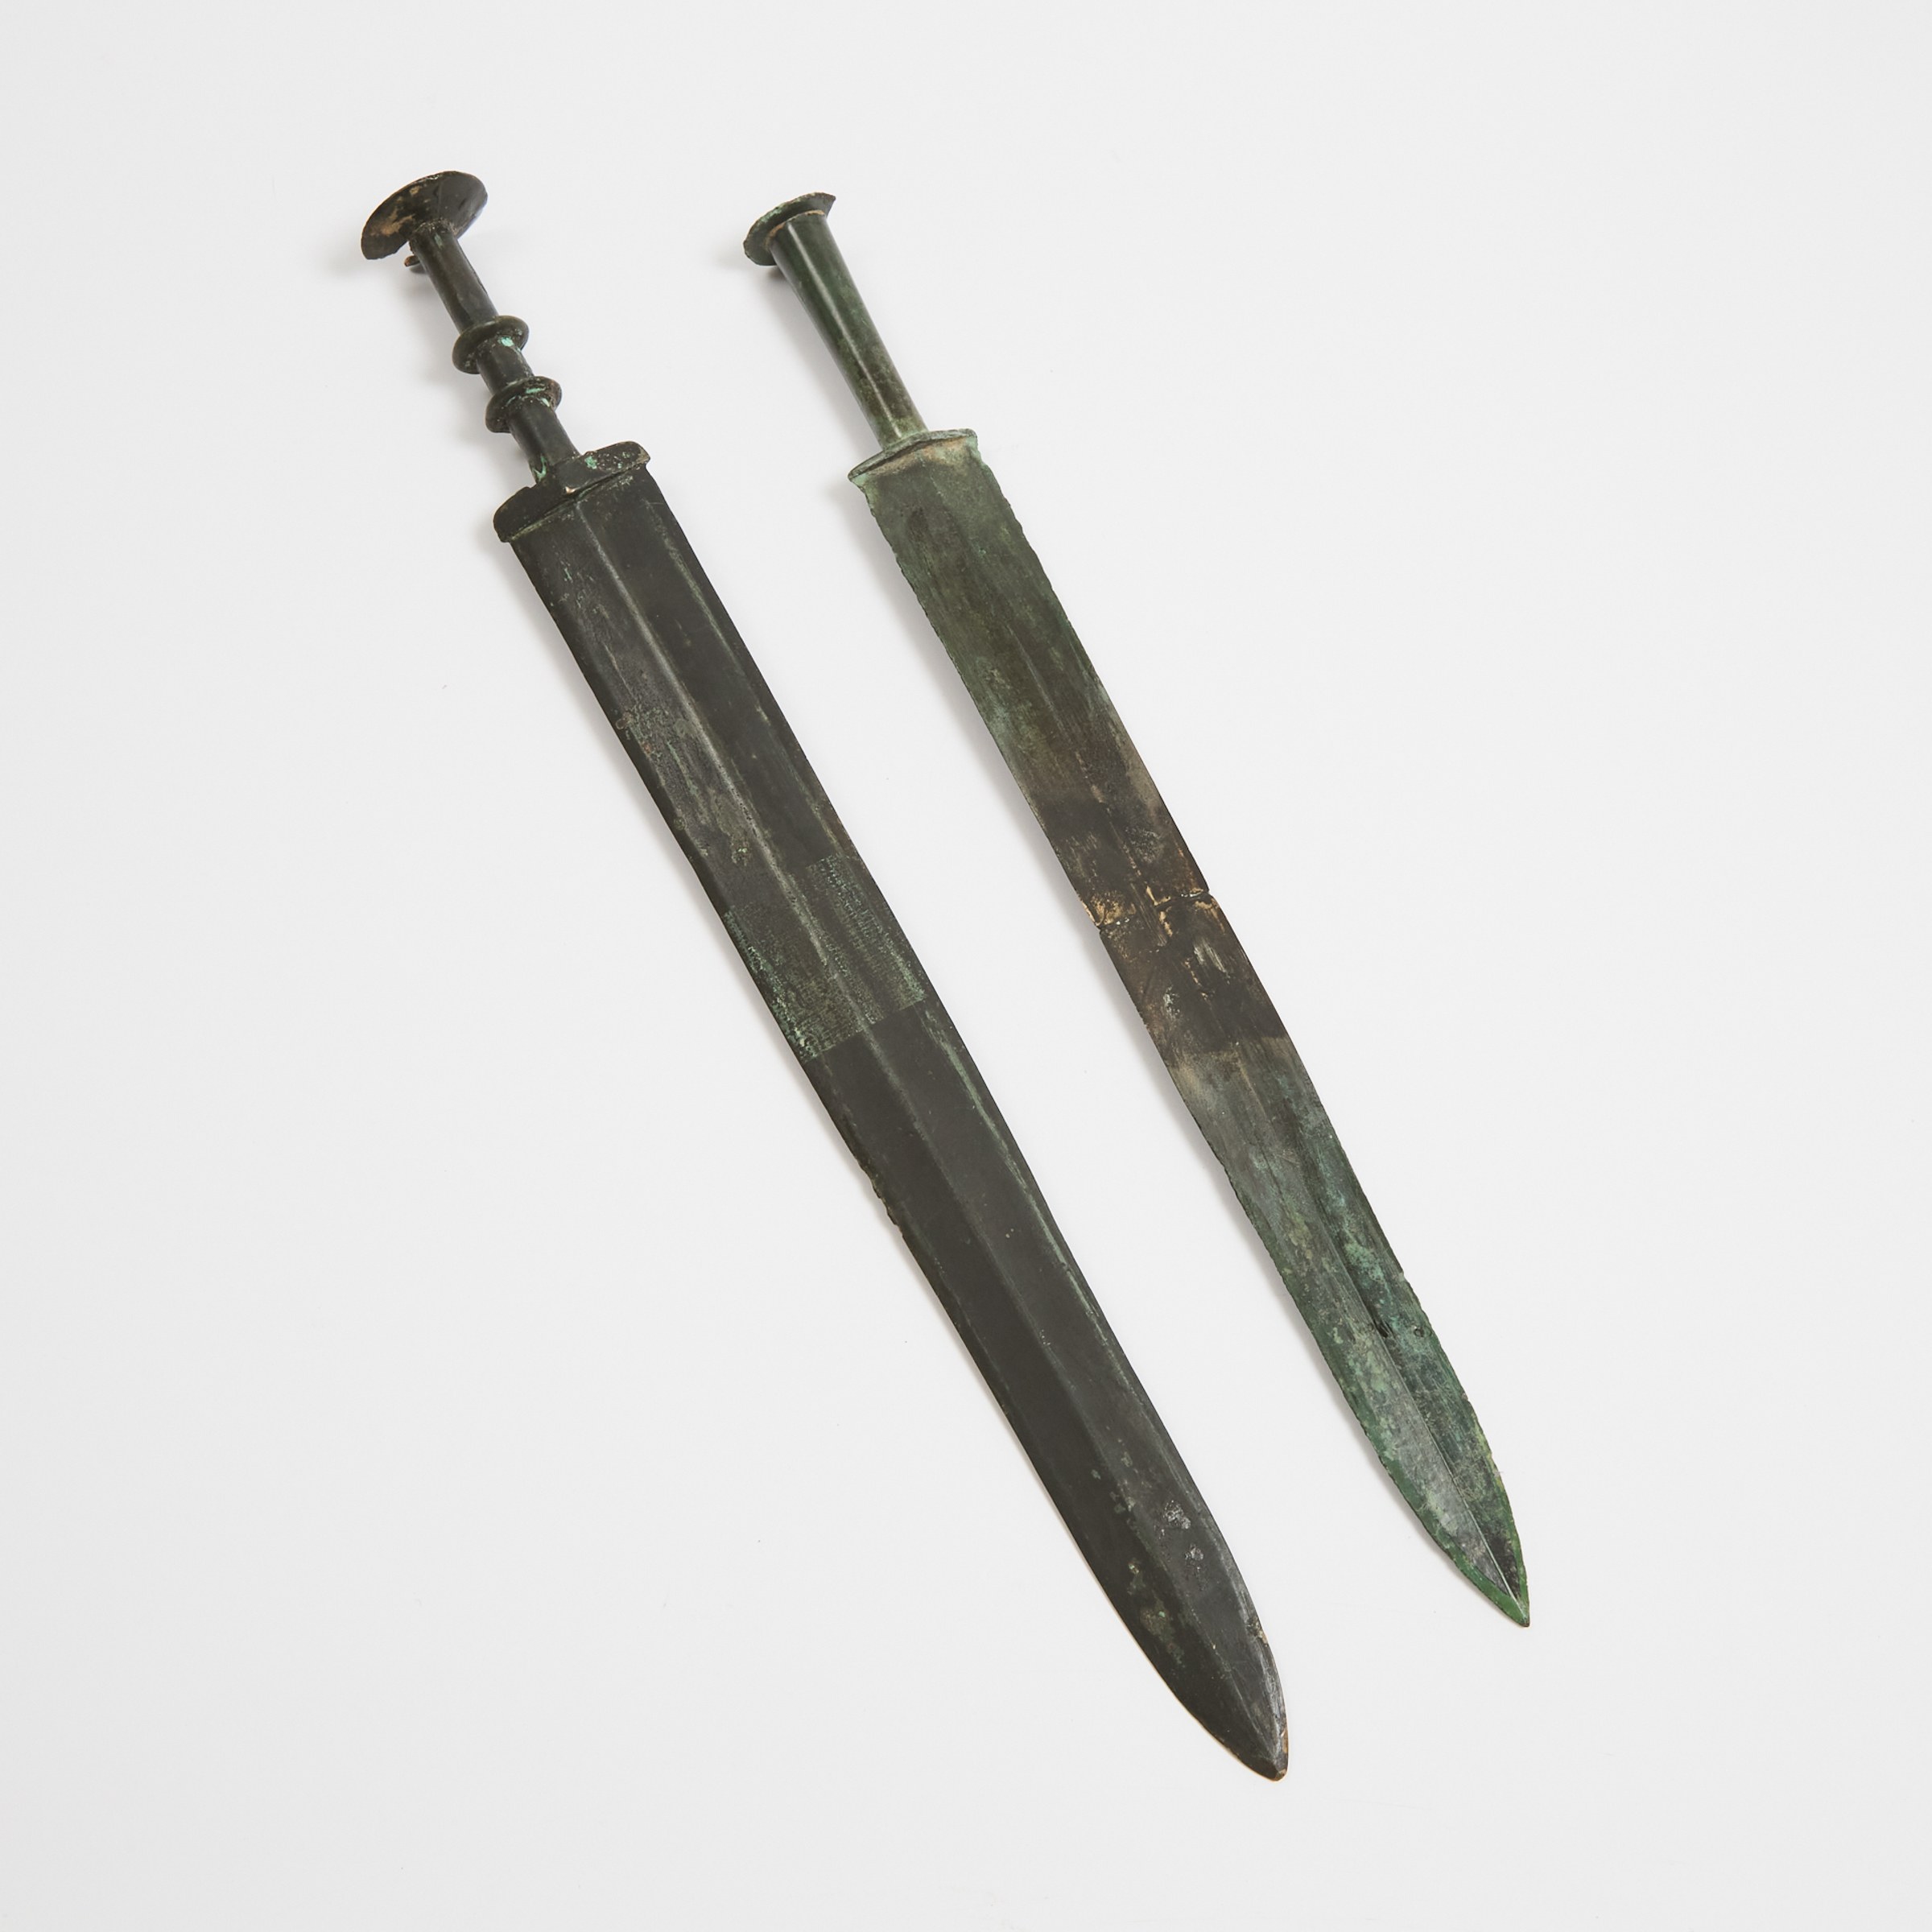 Two Archaic Bronze Swords (Jian), Warring States Period/Western Han Dynasty (475 BC-AD 8)